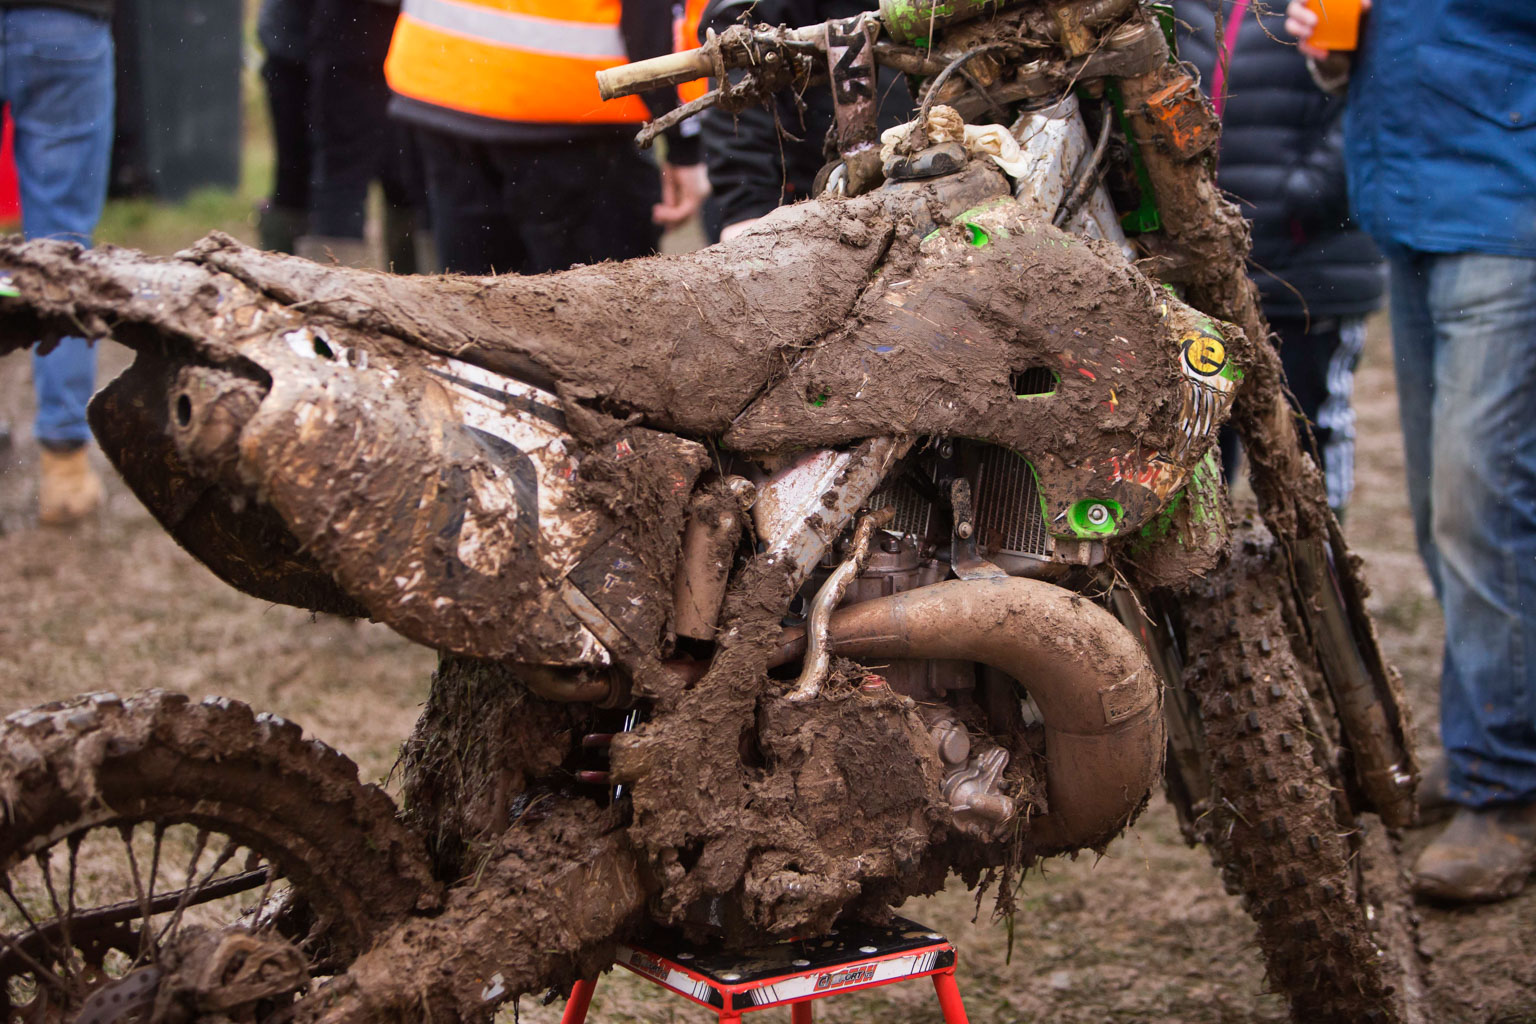 There's a lovely two-stroke under there